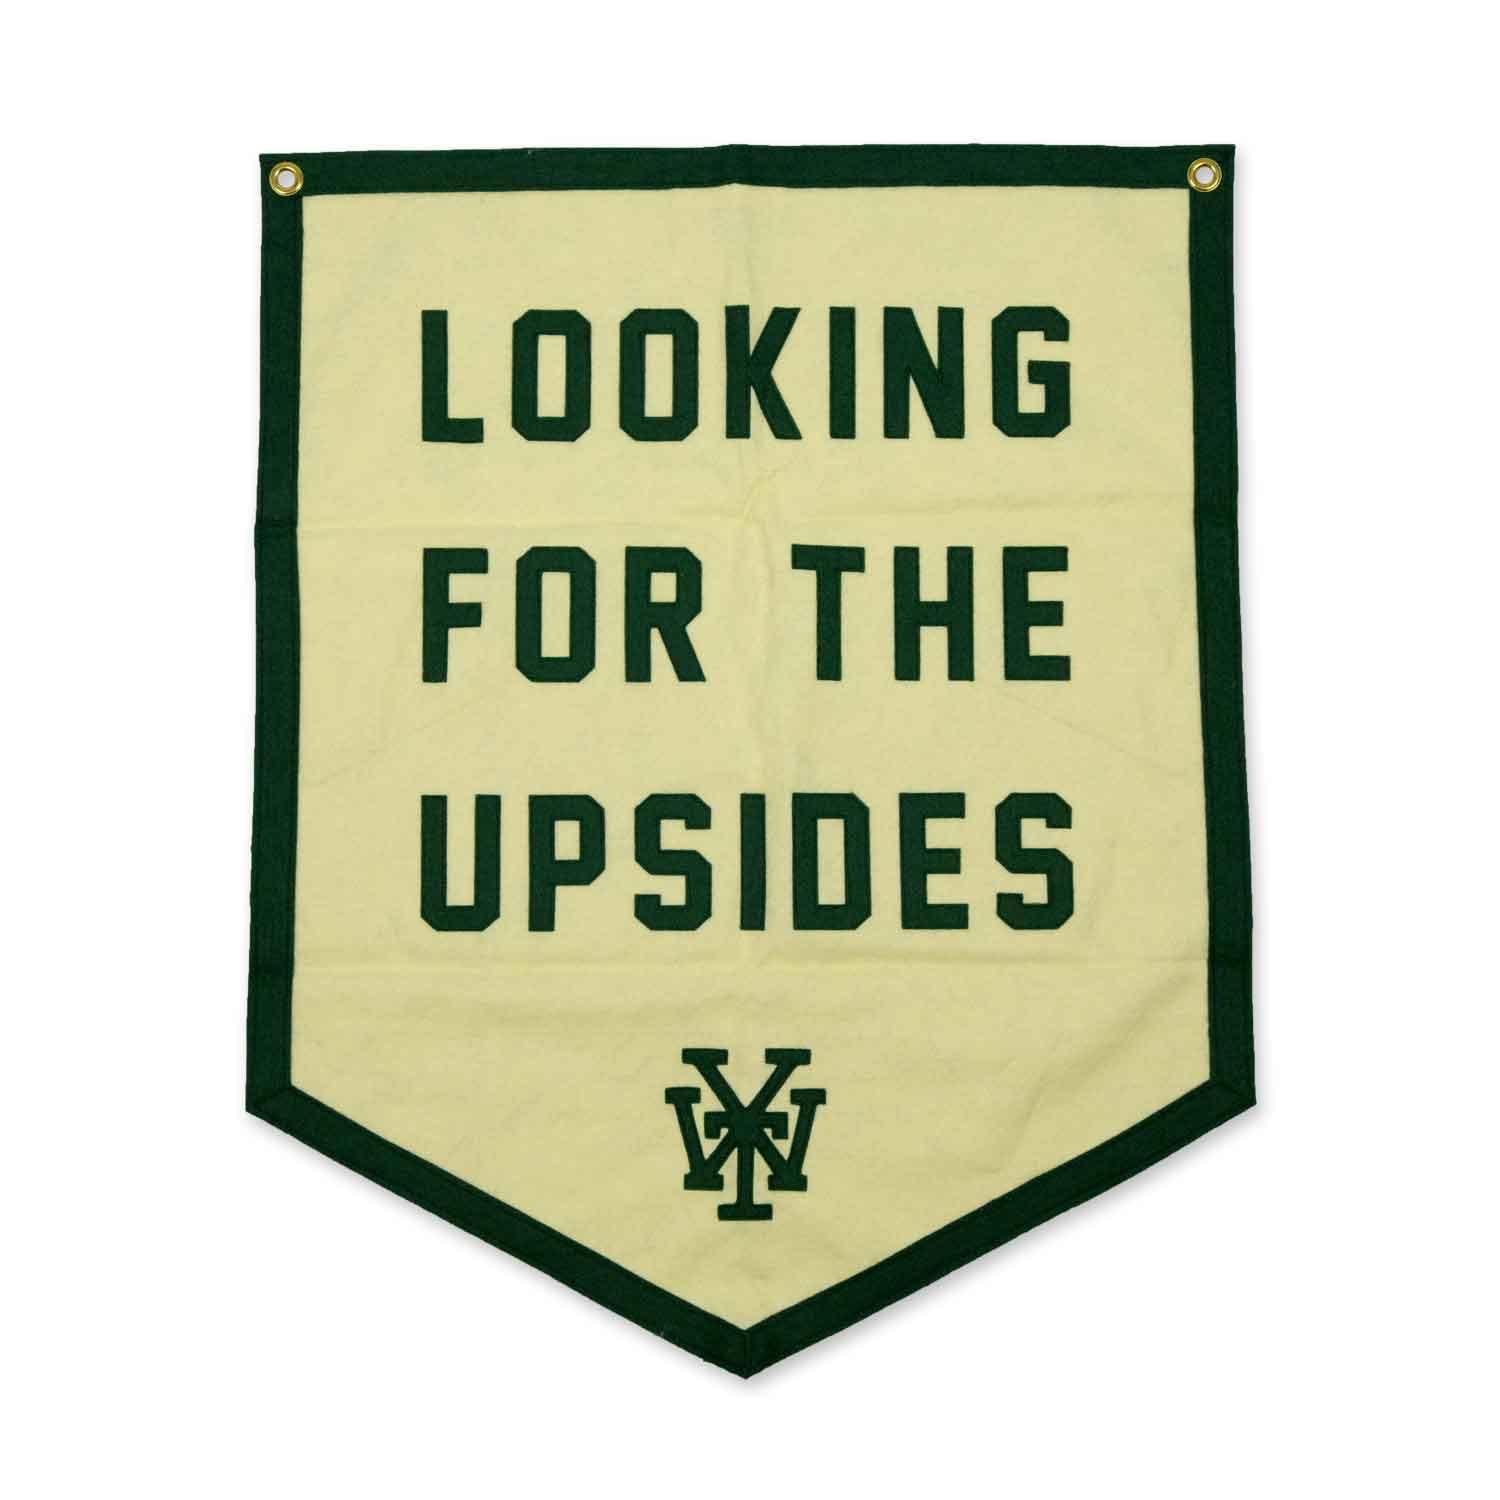 Buy – Looking for the Upsides Oxford Championship Banner – The Wonder Years